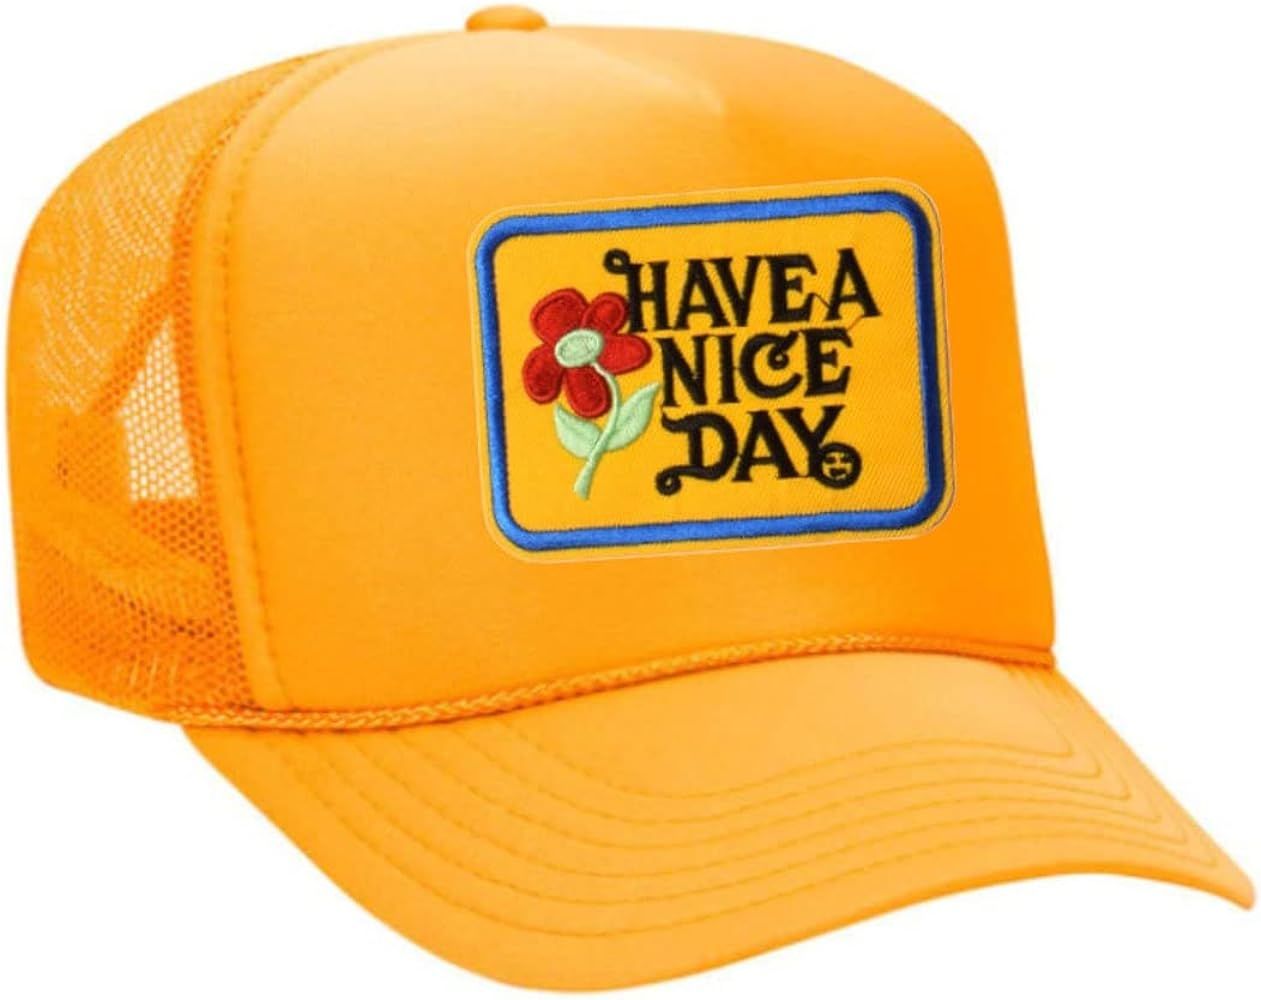 Have A Nice Day Vintage Patch Trucker Hat | Amazon (US)